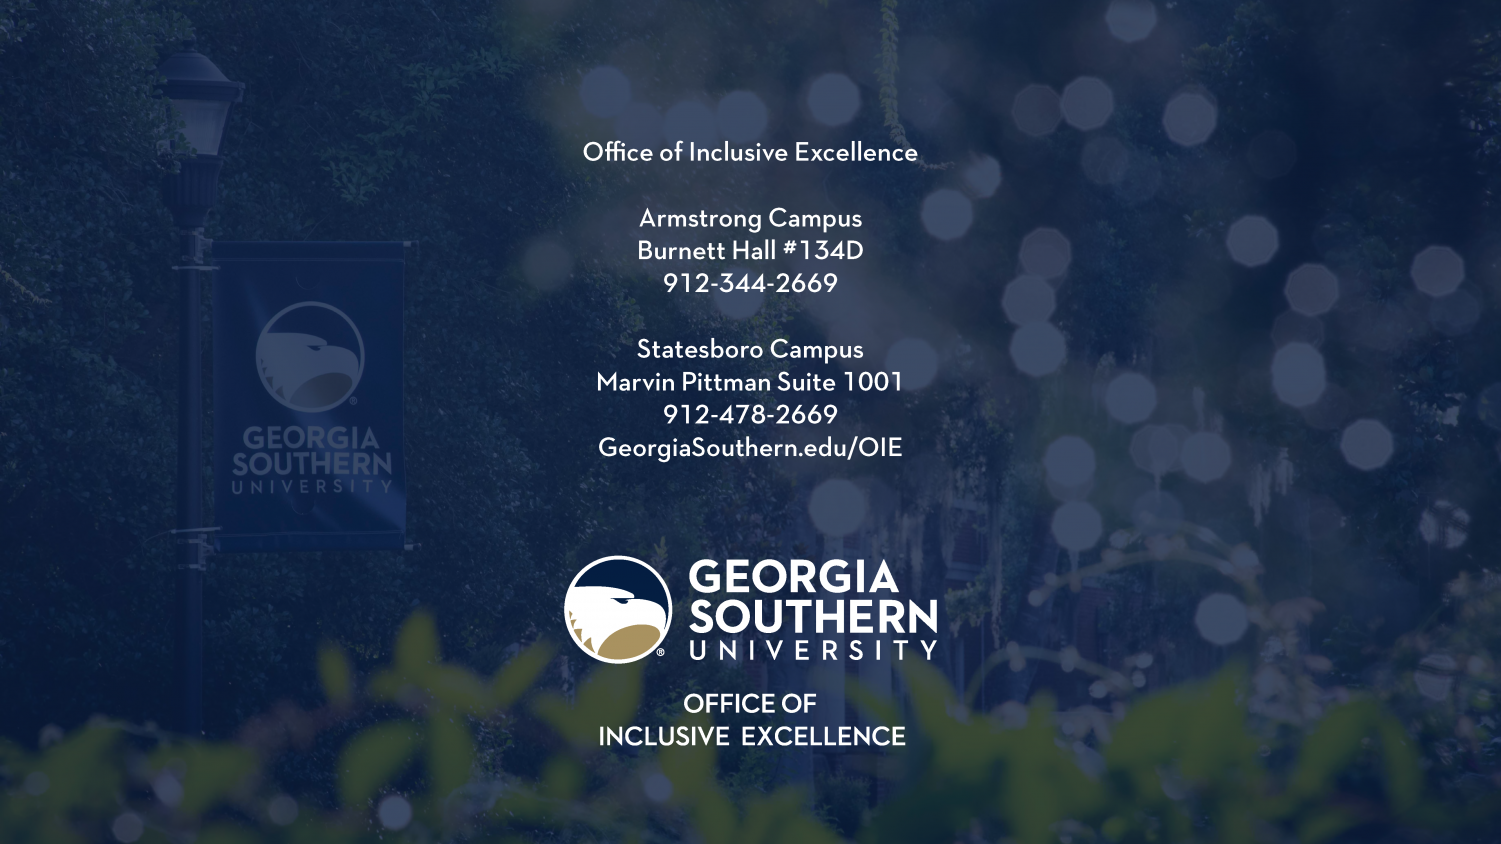 EXCLUSIVE%3A+Georgia+Southern+releases+27-page+Inclusive+Excellence+action+plan